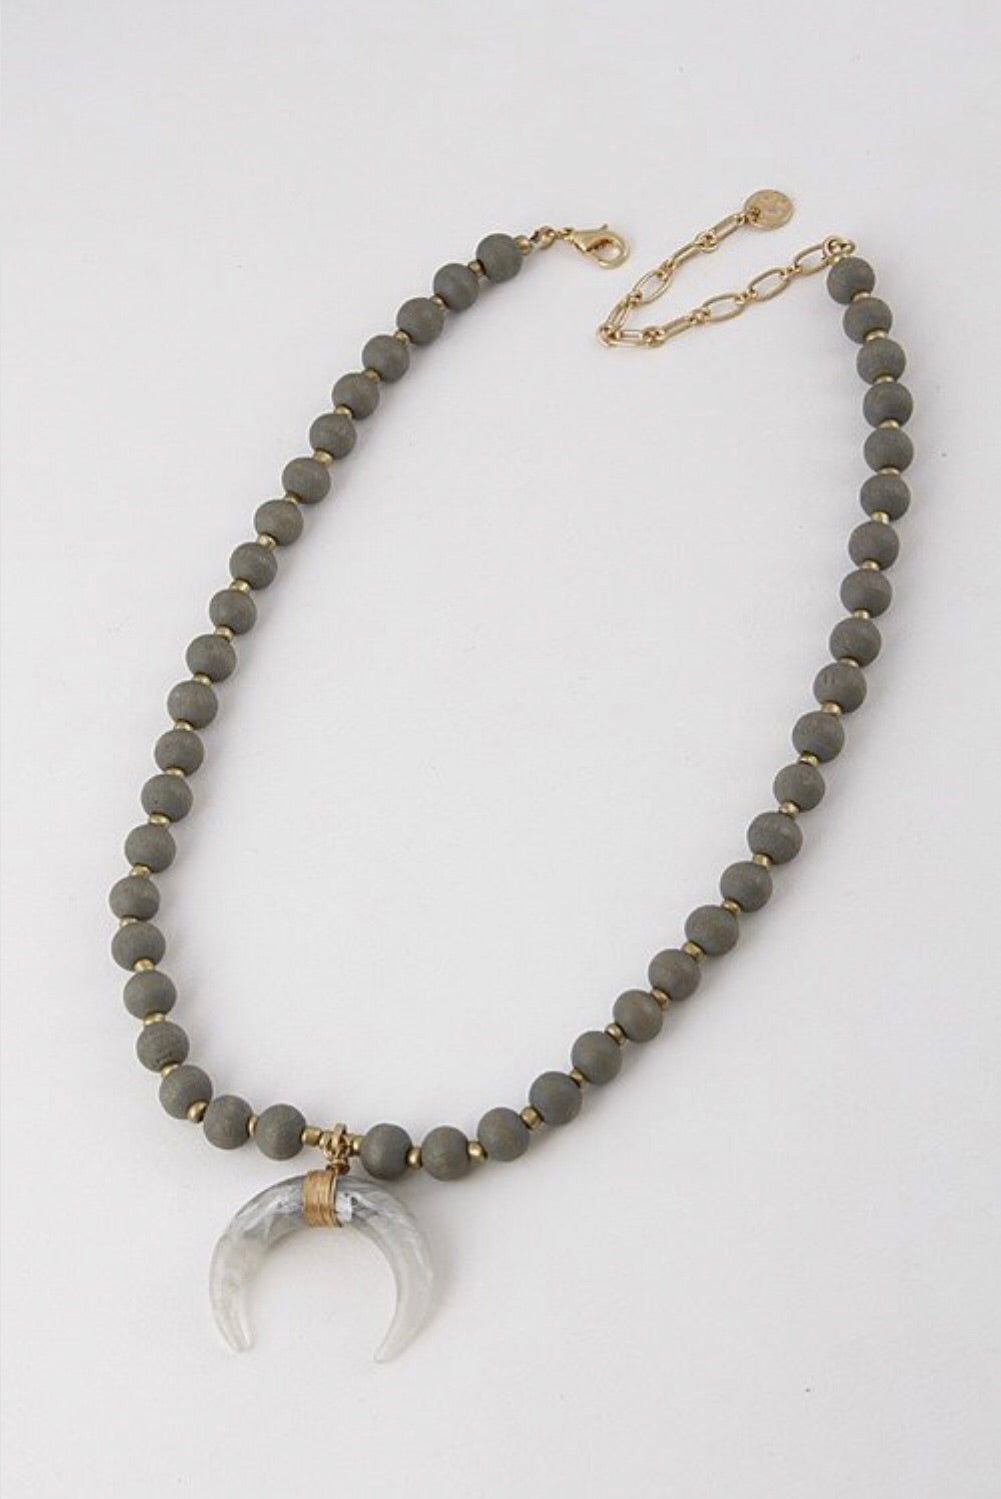 Bead and Horn Necklace - Corinne an Affordable Women's Clothing Boutique in the US USA